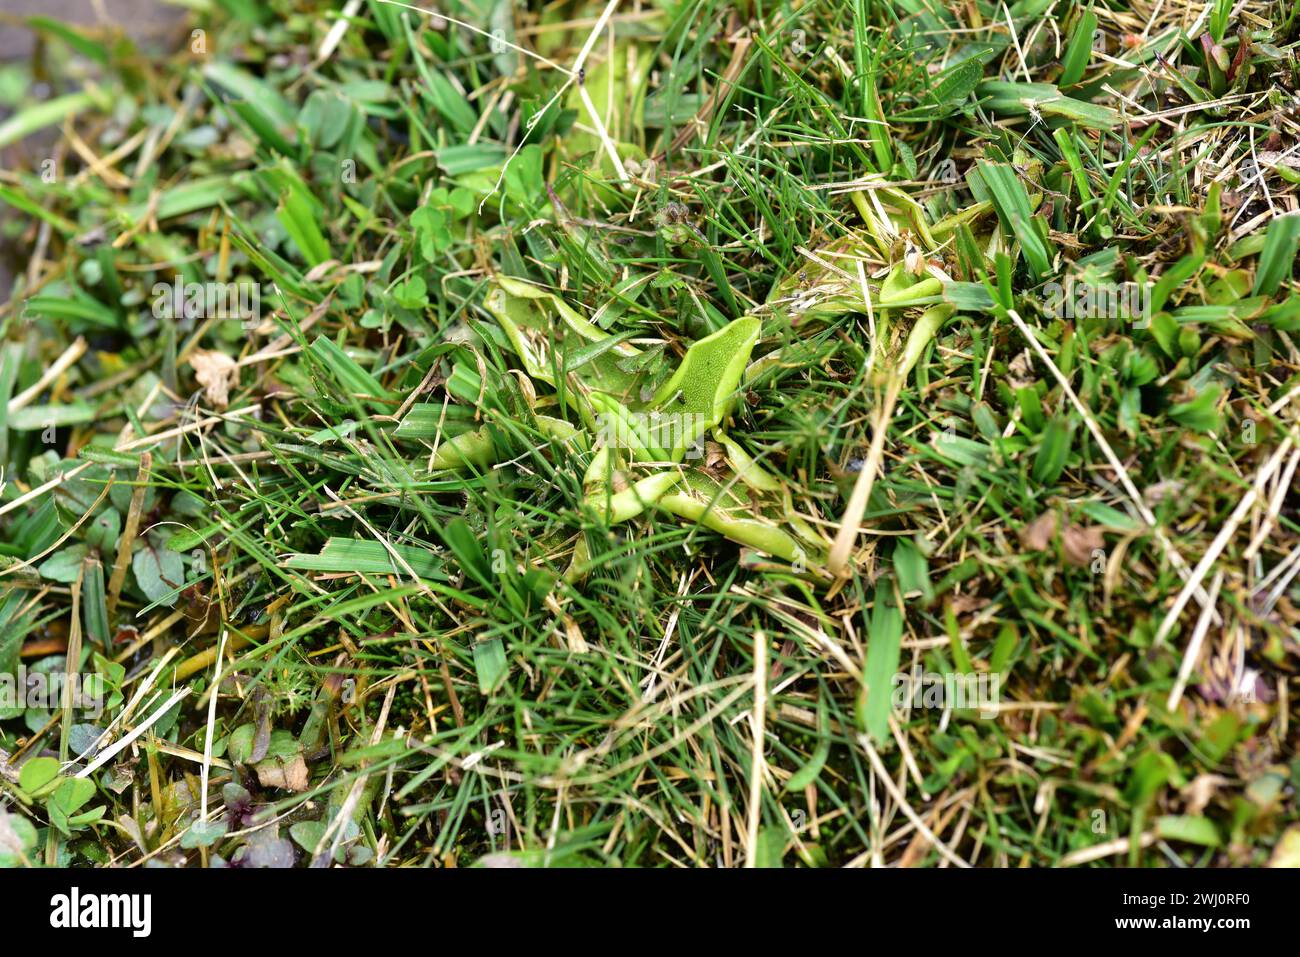 Pinguicula nevadensis is a carnivorous plant endemic to Sierra Nevada. This photo was taken in Sierra Nevada National Park, Granada province, Andaluci Stock Photo